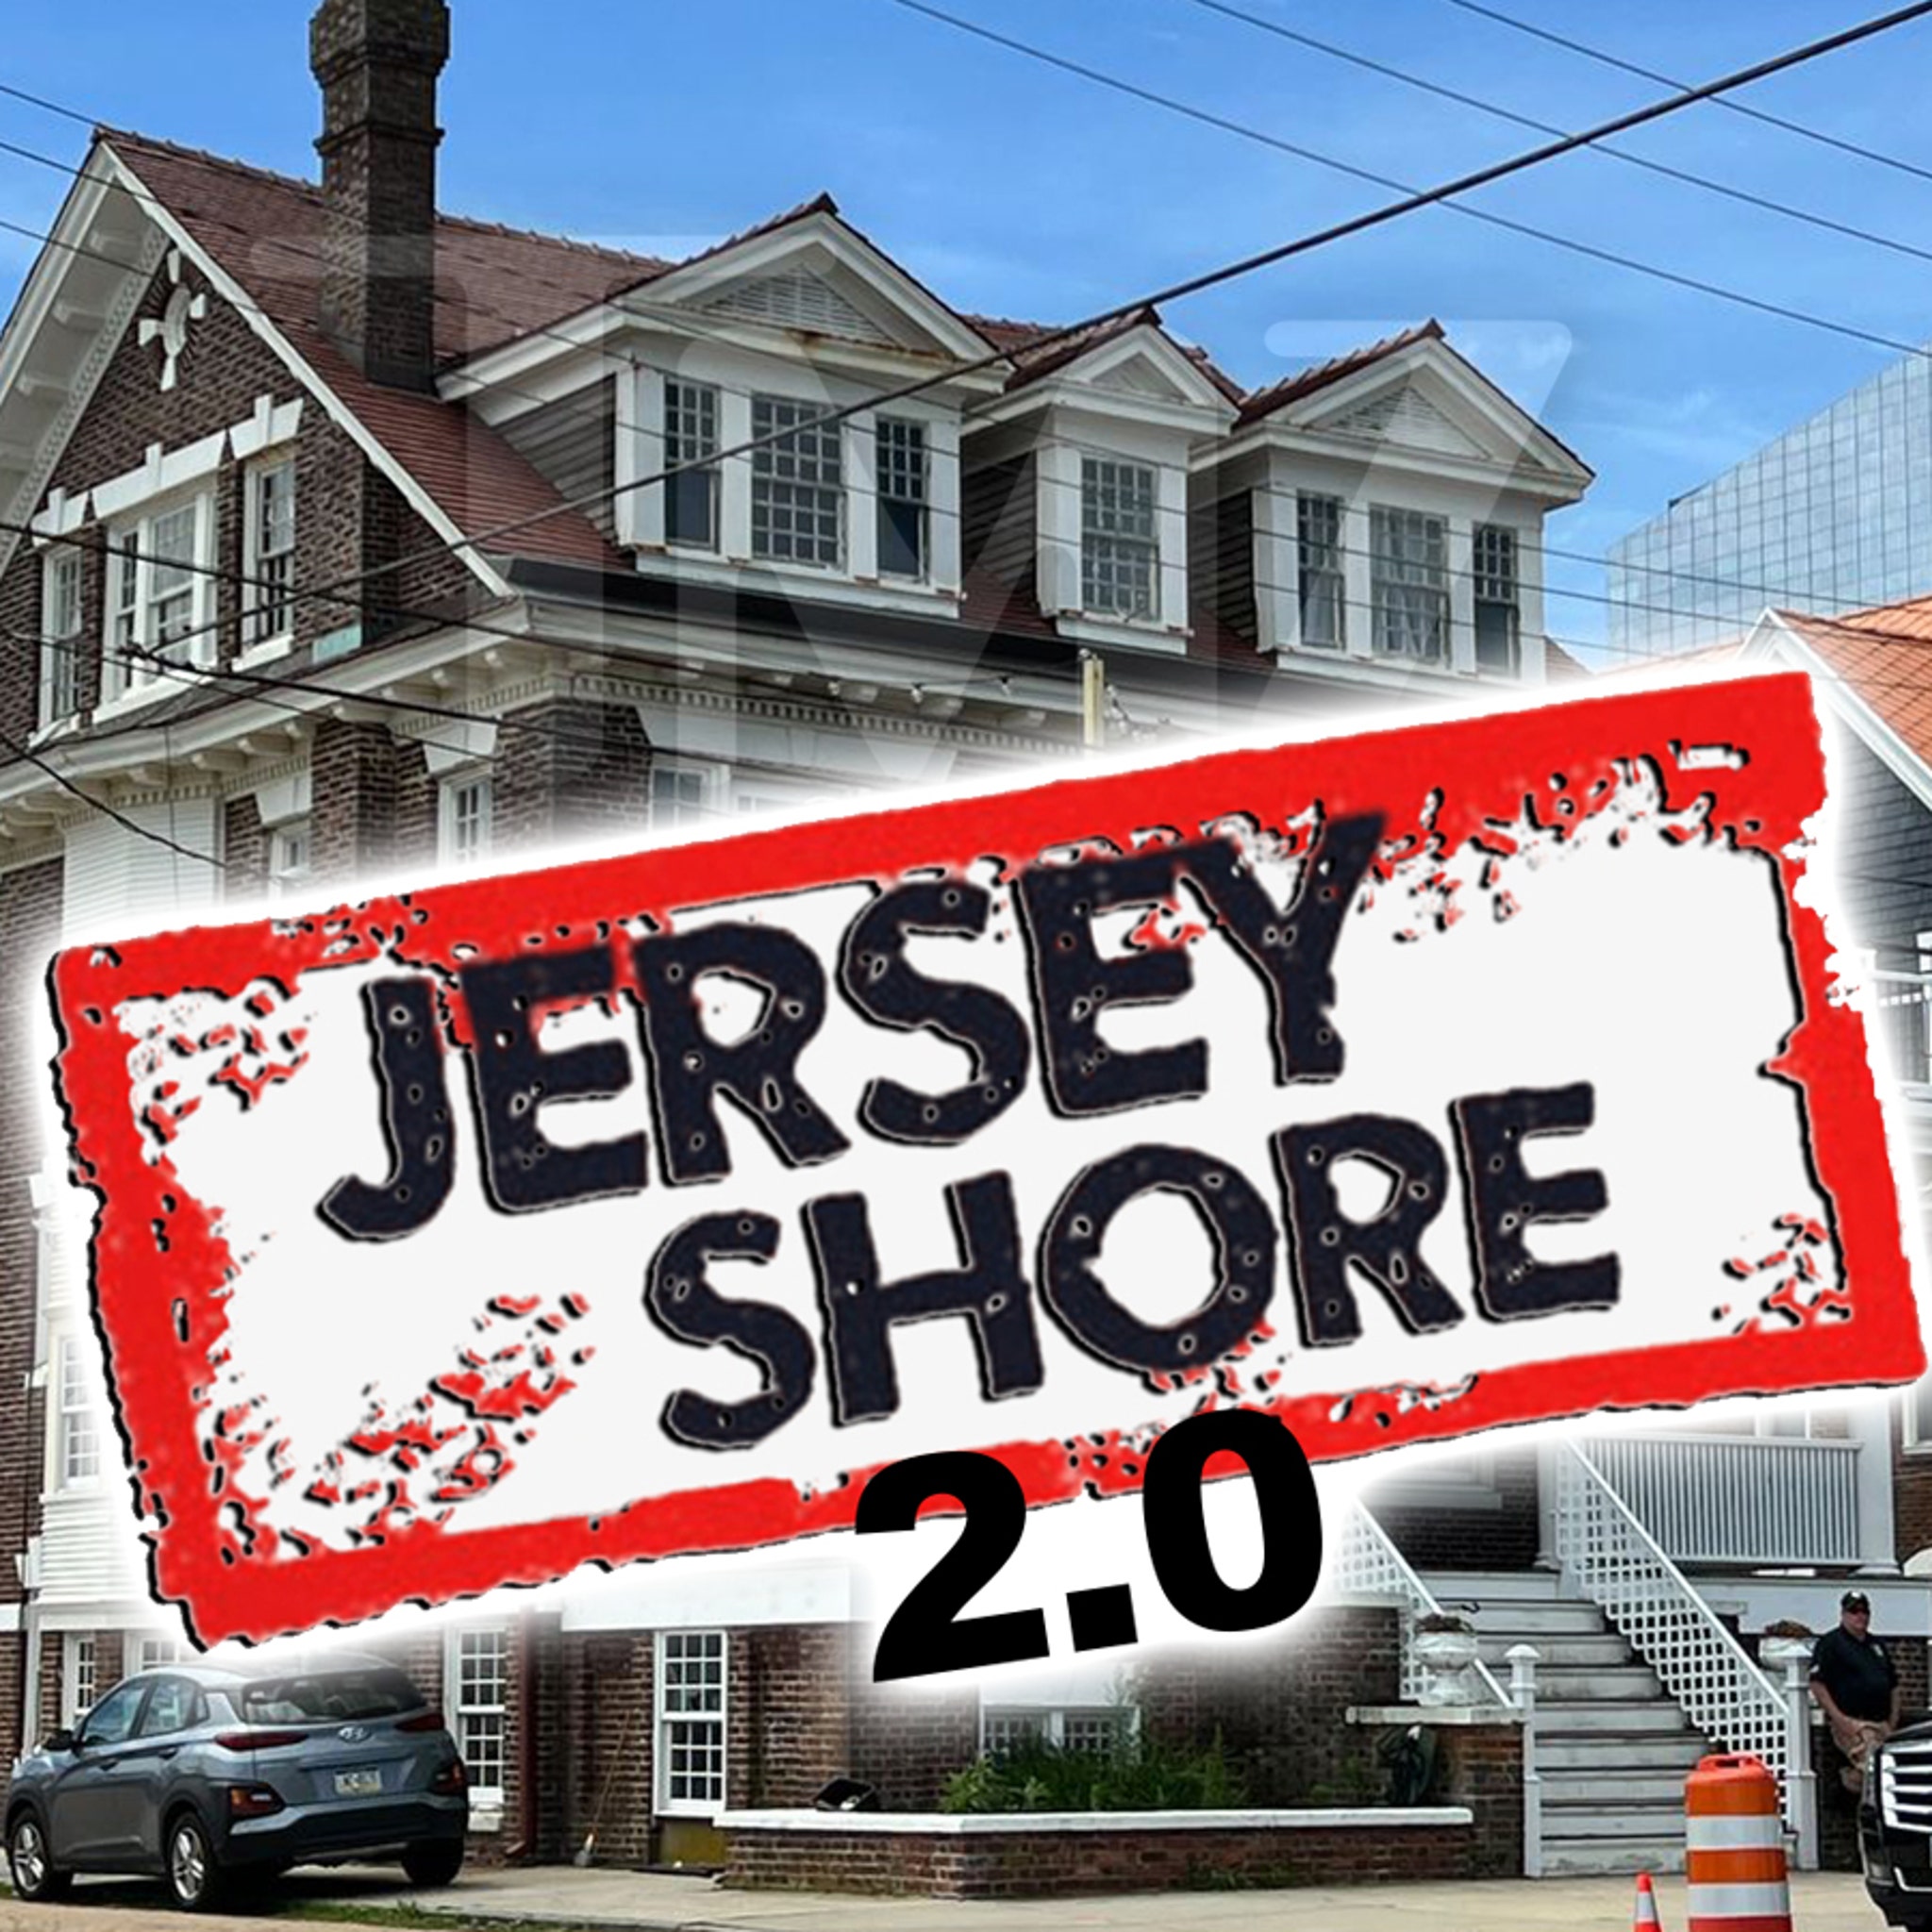 Jersey Shore 2.0 Suddenly Stops Production After Original Cast